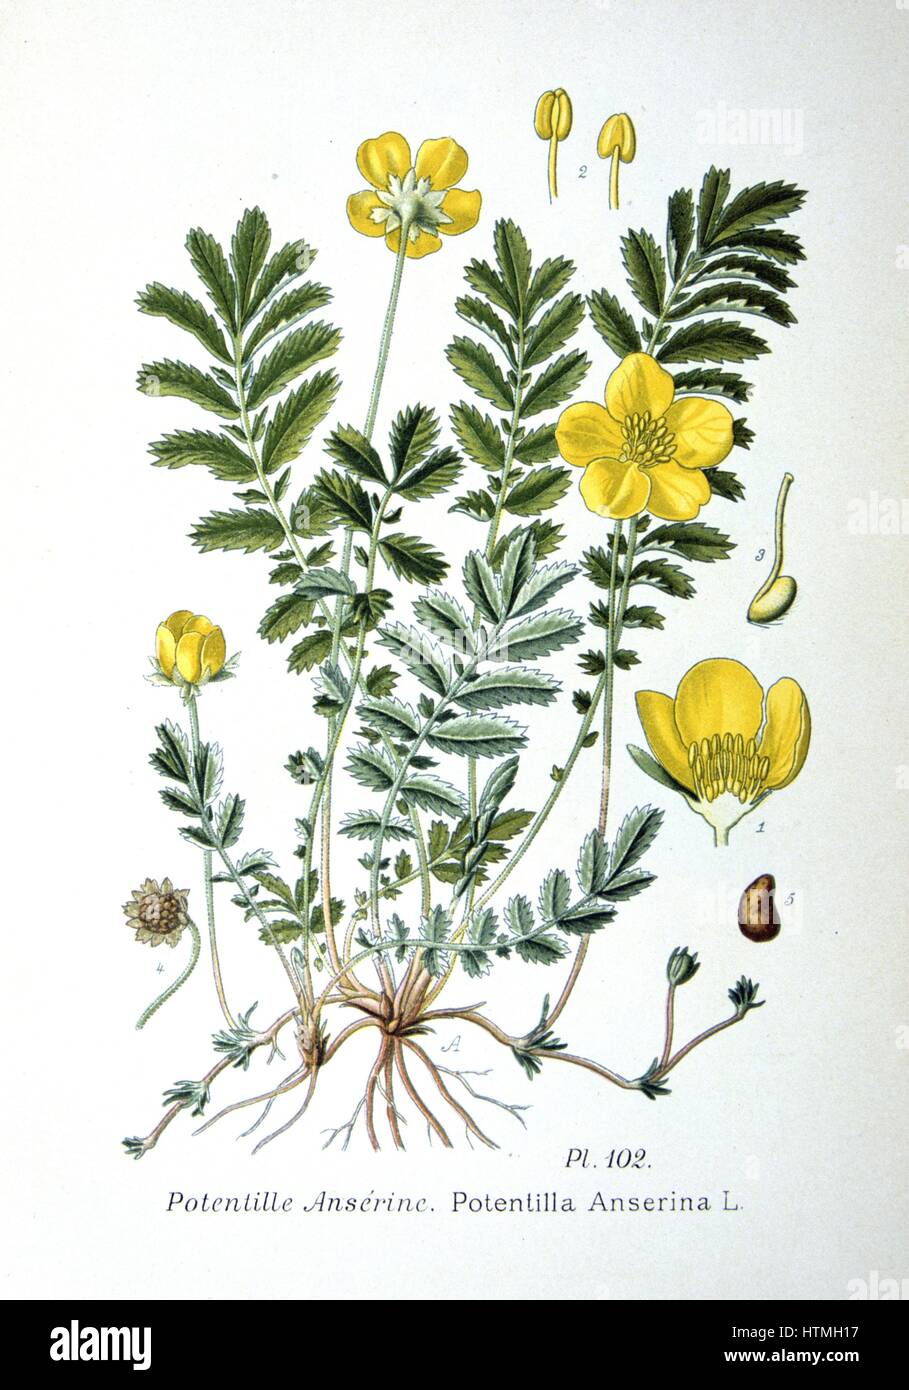 Common Silverweed (Argentina anserina or Potentilla anserina) Ceeping herbaceous plant of temperate regions of the Northern Hemisphere. From Amedee Masclef "Atlas des Plantes de France", Paris, 1893. Stock Photo